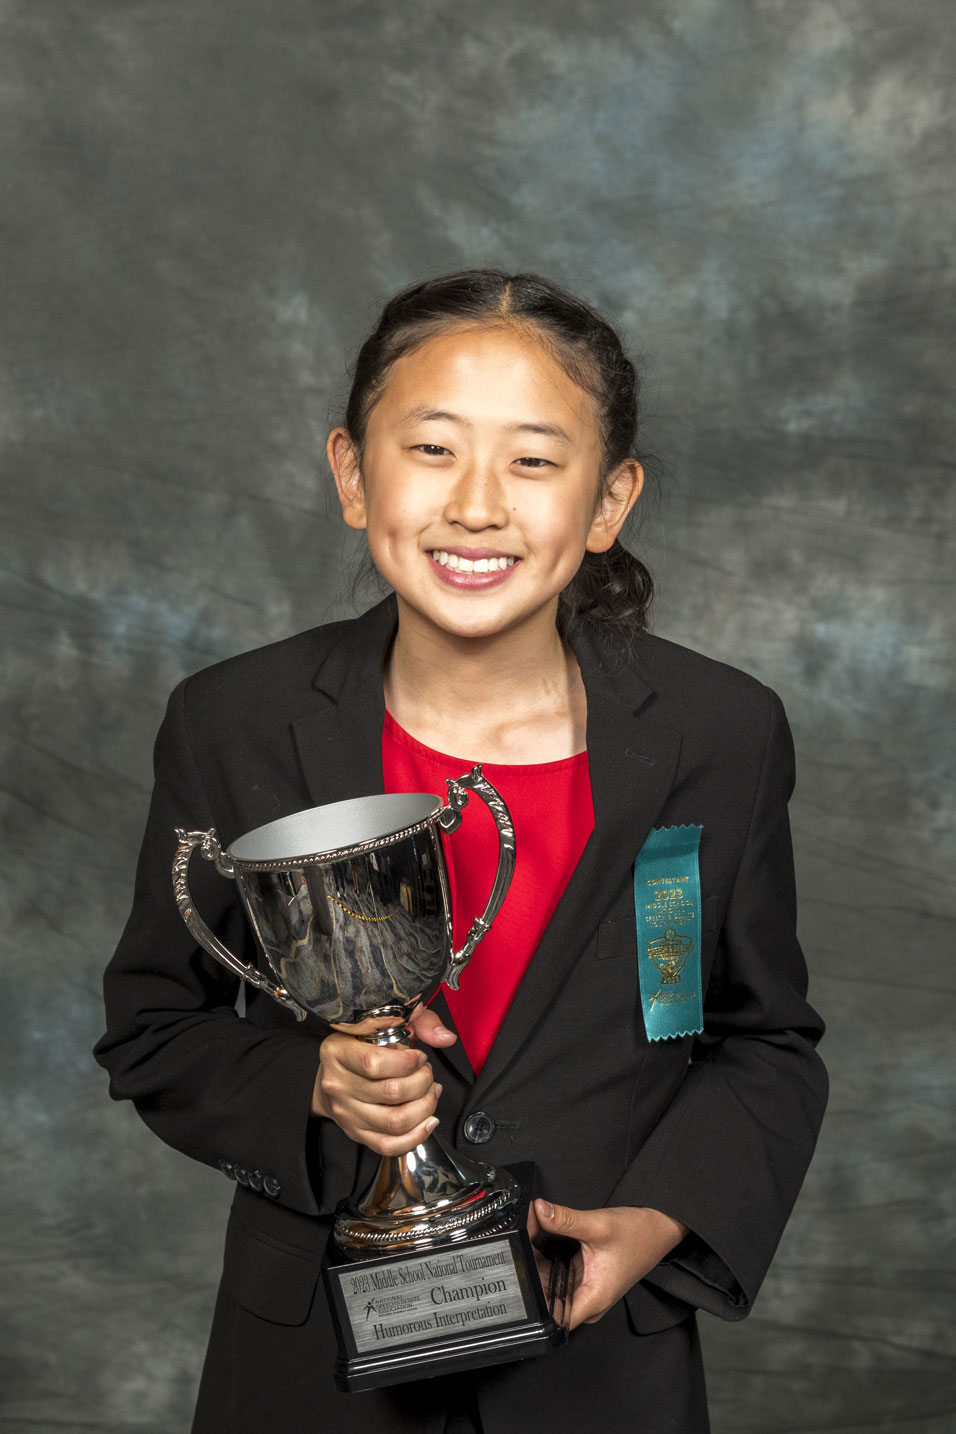 Ella Kim from Robert C. Fisler in California
Coached by Adriena Toghia and Joshua Beckles